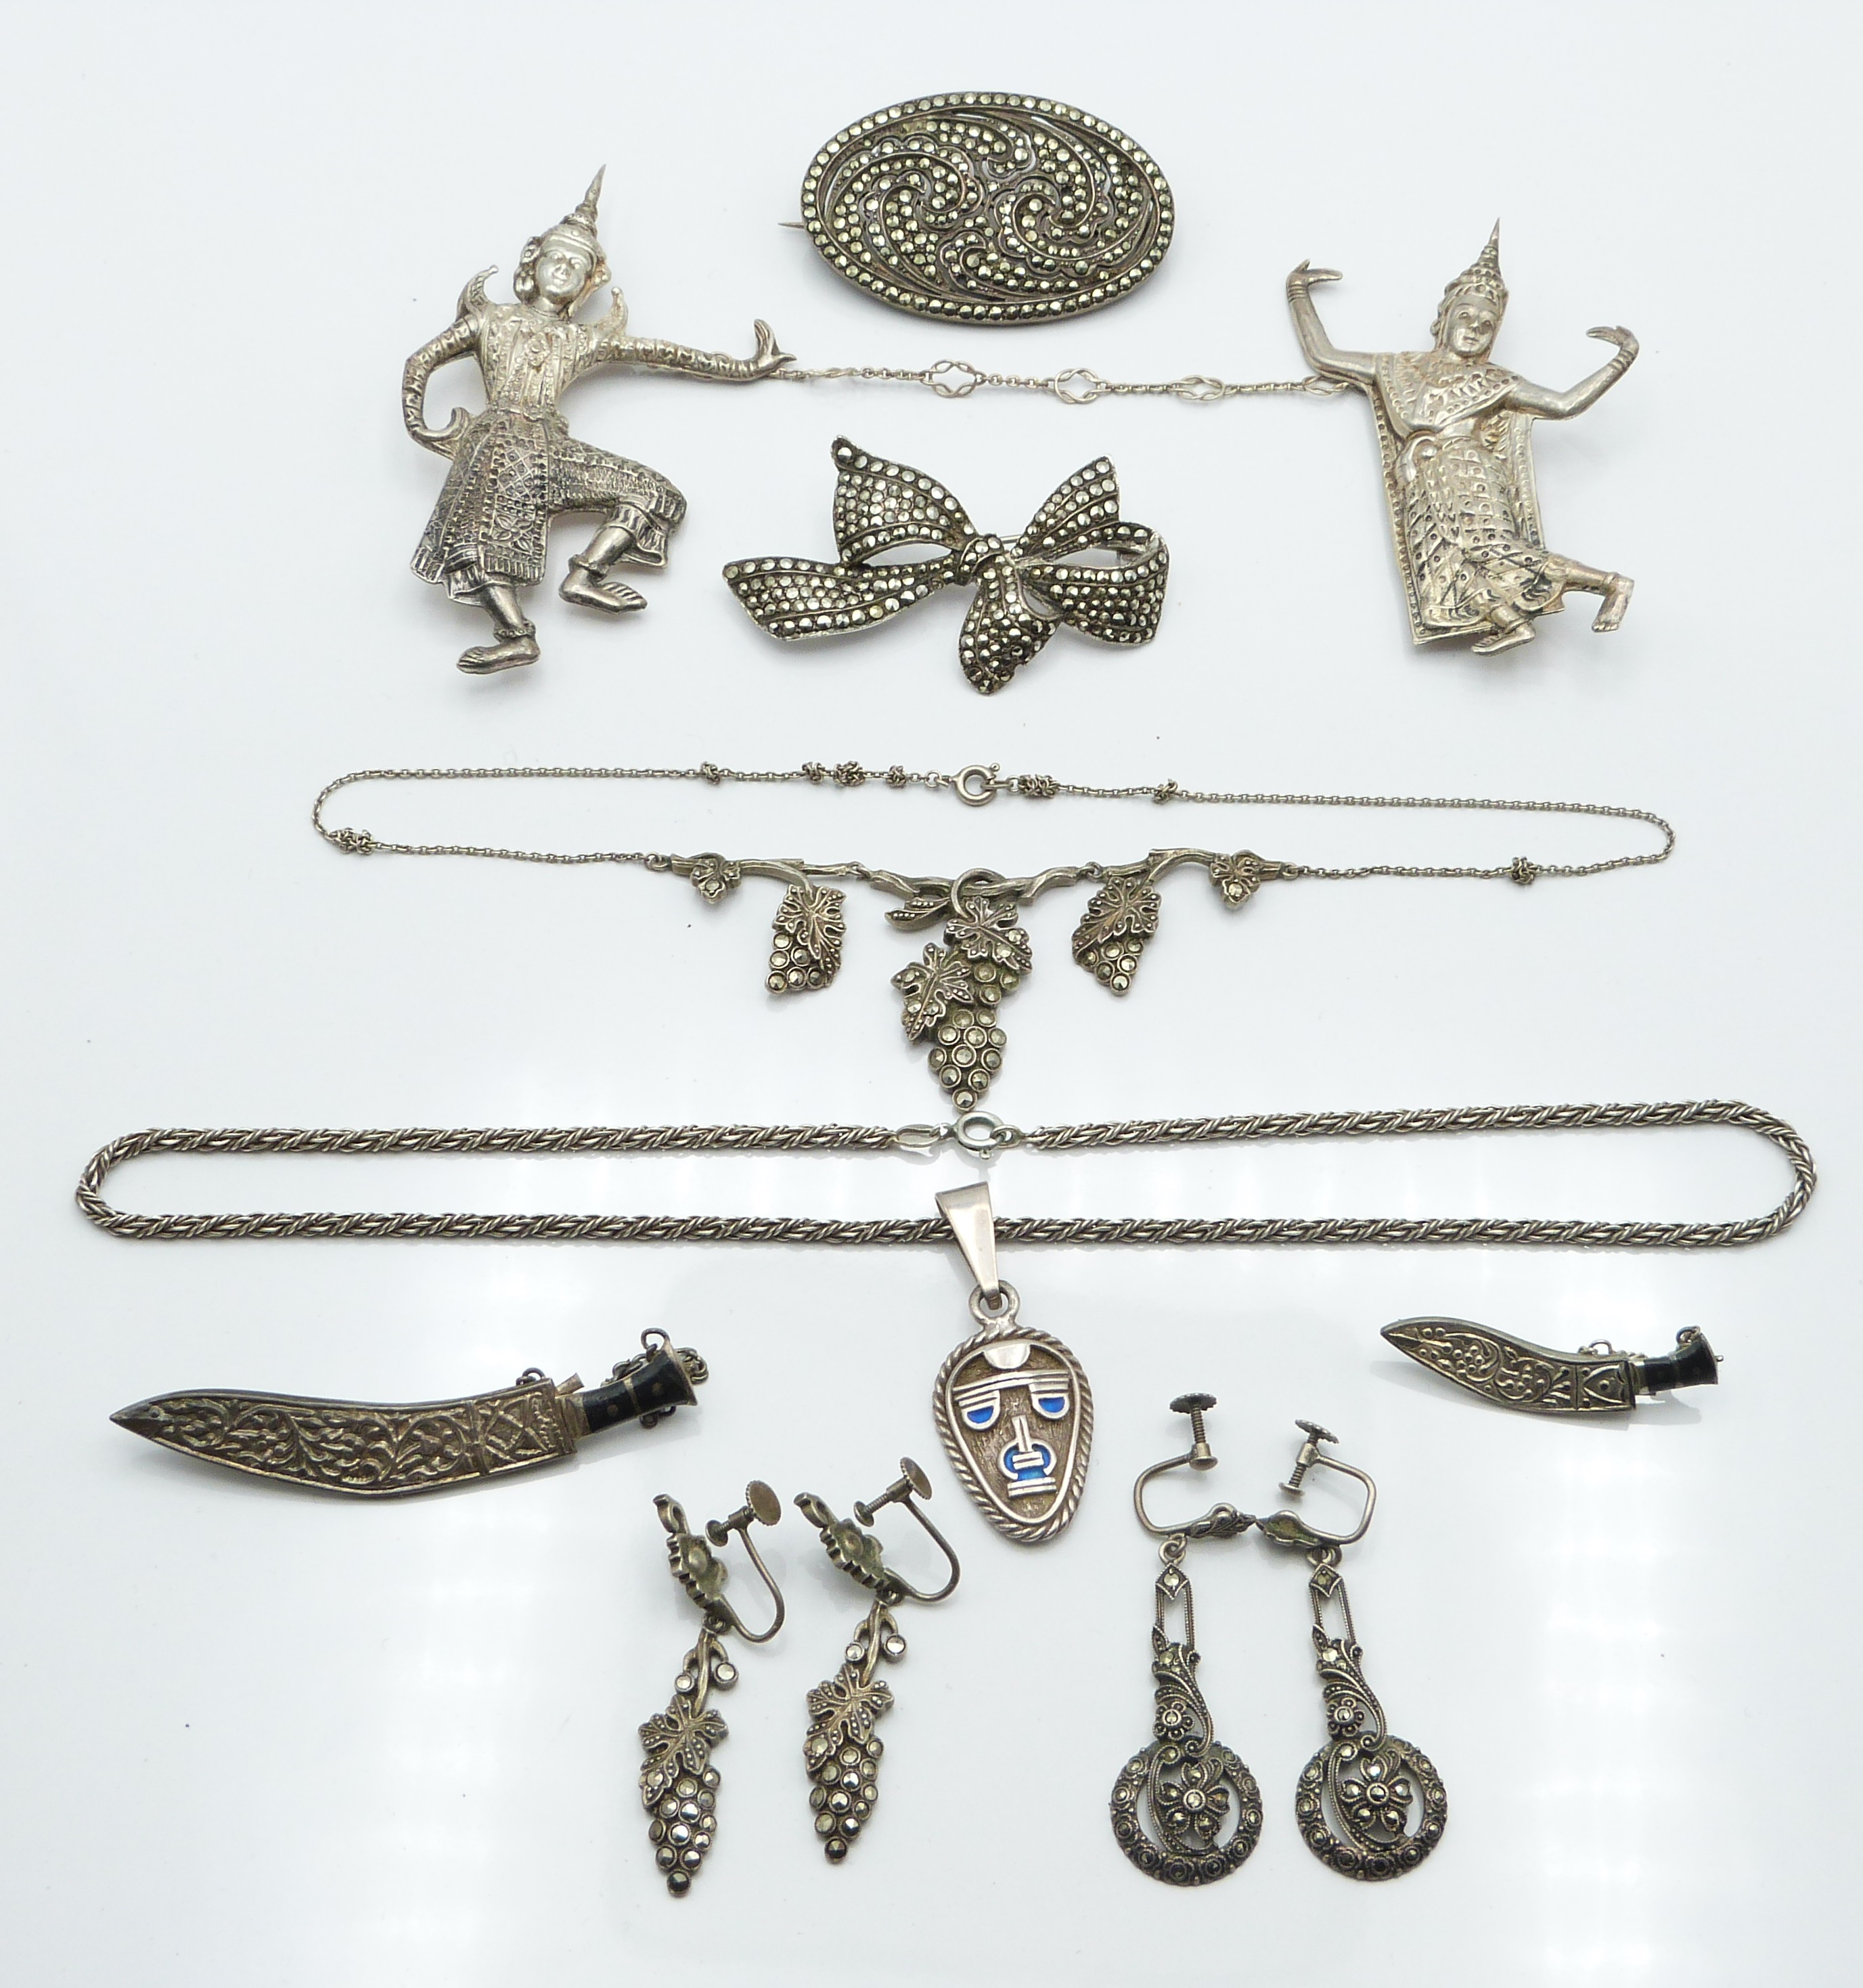 Two Siam silver brooches depicting deities, a silver pendant depicting a mask, white metal knife